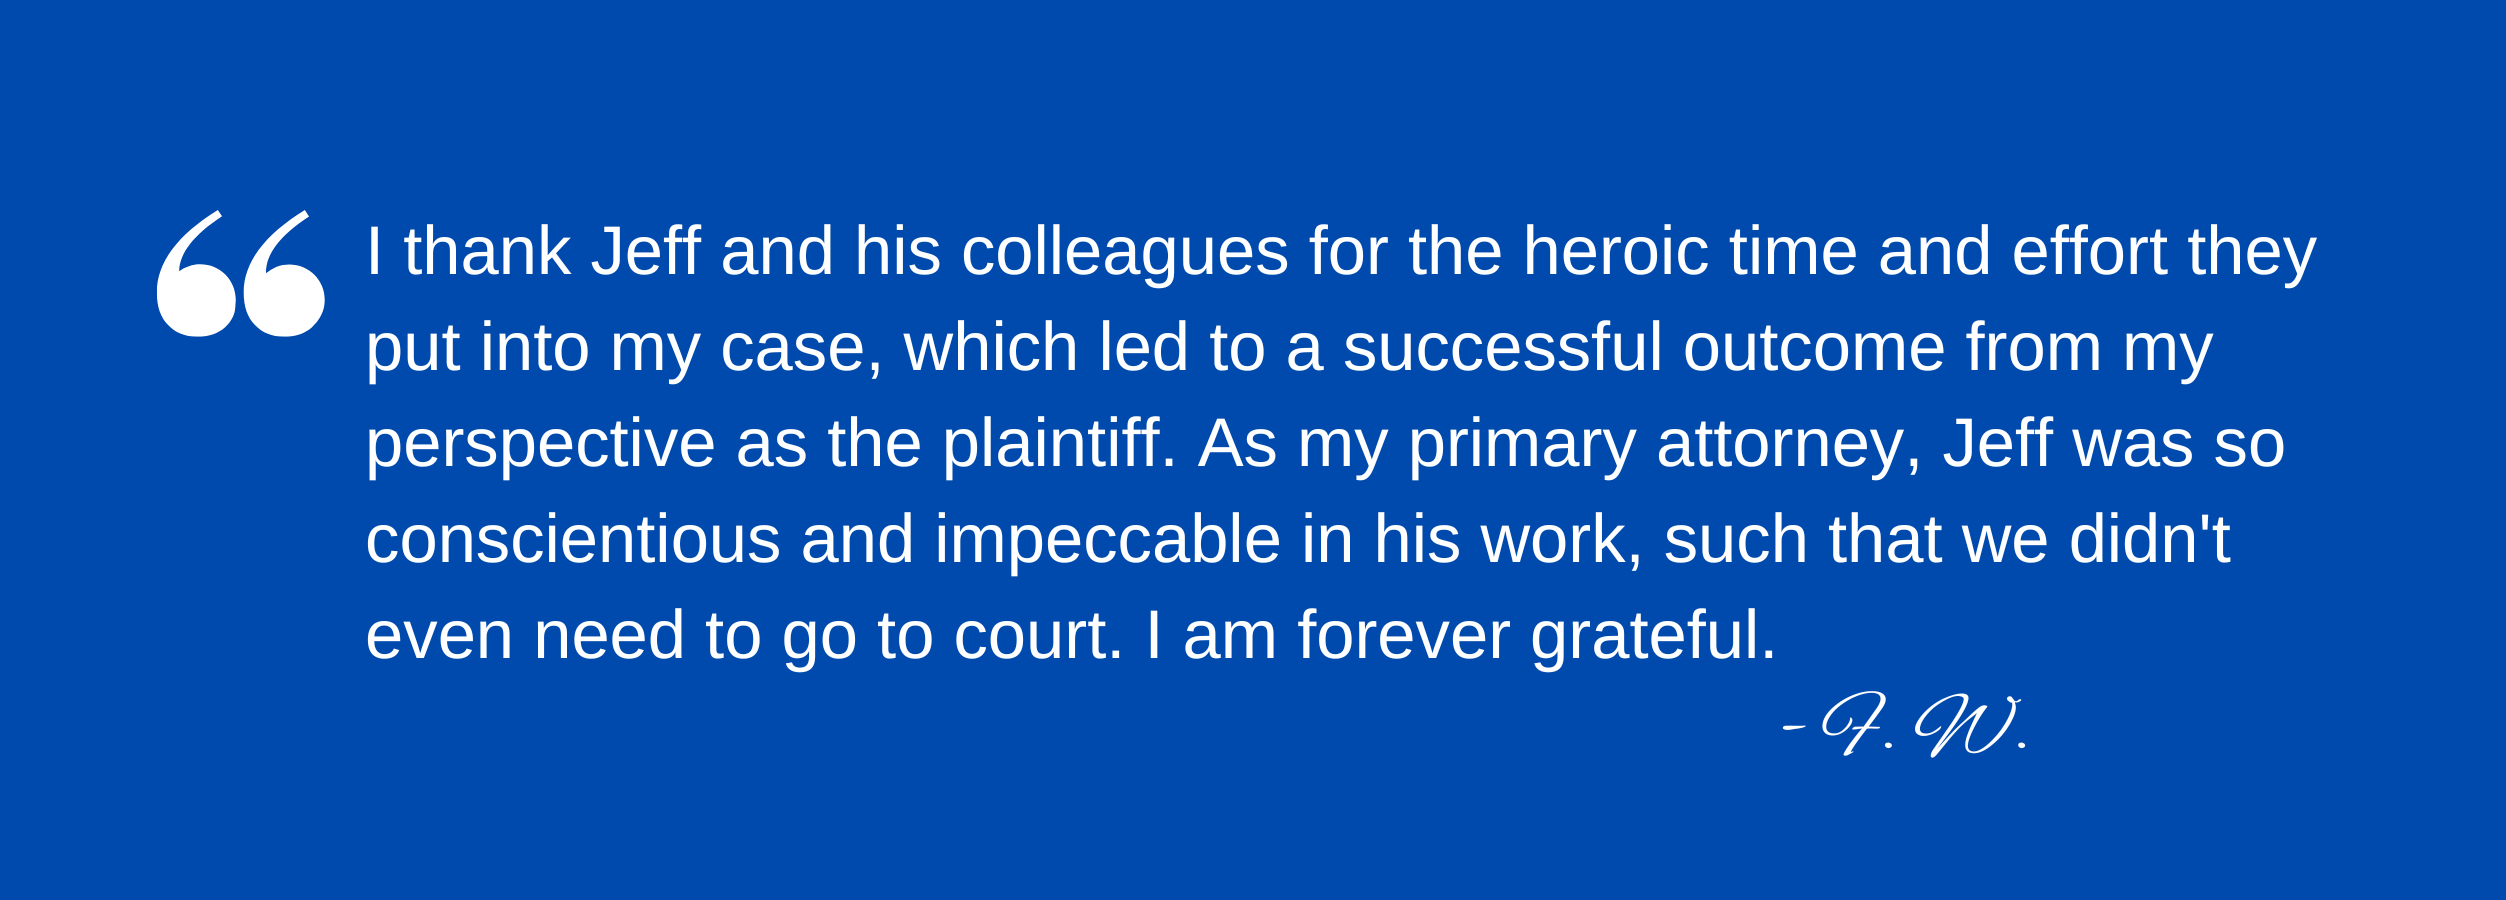 Testimonial: "I thank Jeff and his colleagues for the heroic time and effort they put into my case, which led to a successful outcome from my perspective as the plaintiff. As my primary attorney, Jeff was so conscientious and impeccable in his work, such that we didn't even need to go to court. I am forever grateful."